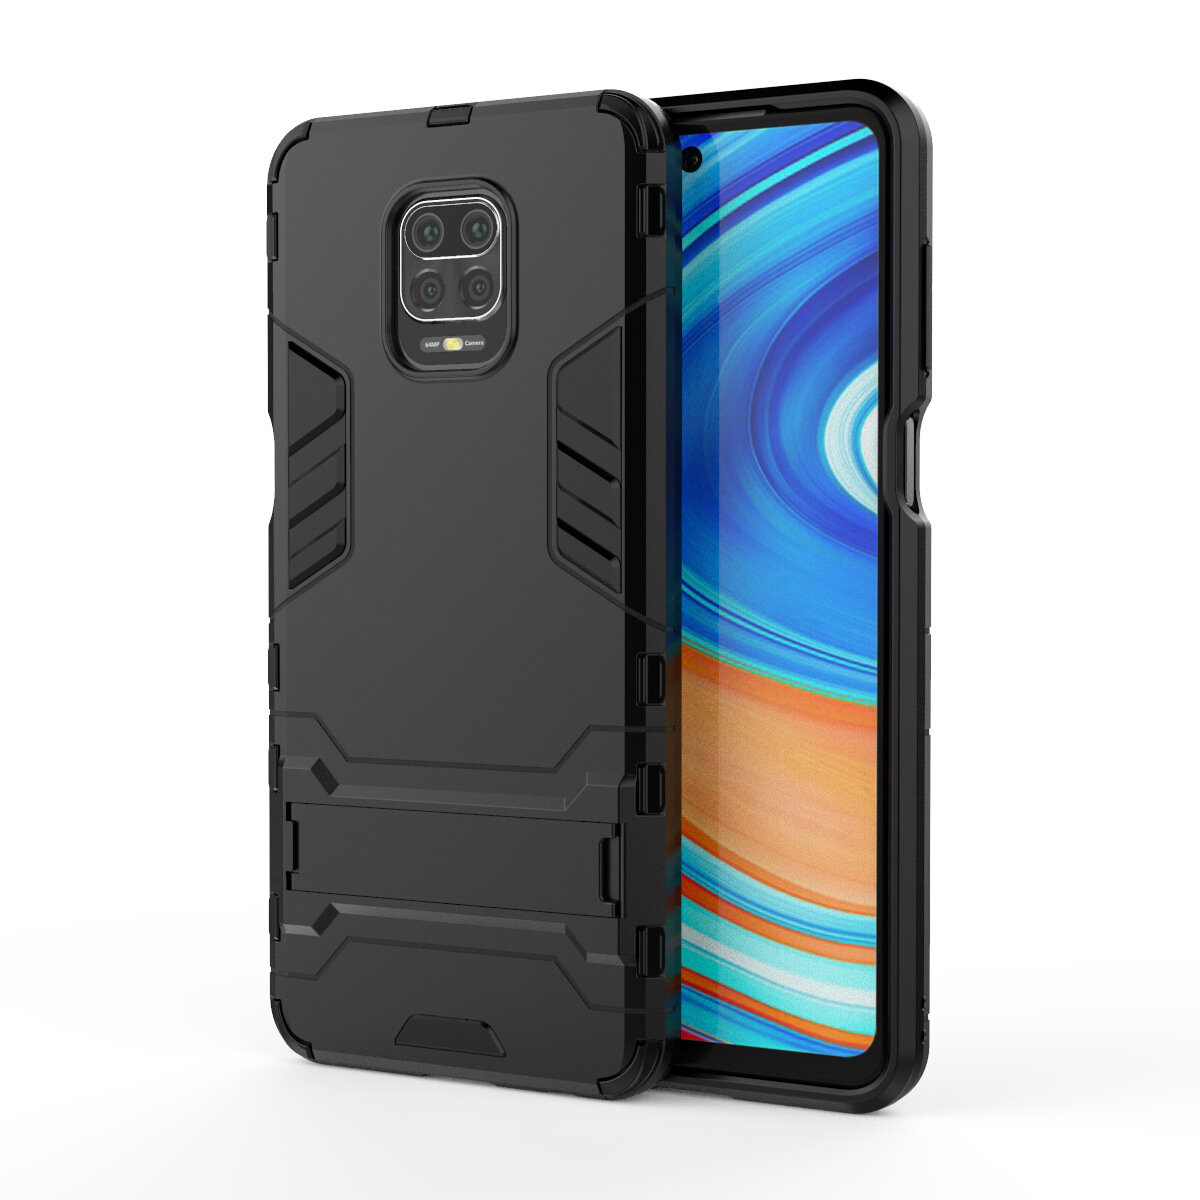 

Bakeey for Xiaomi Redmi Note 9S / Xiaomi Redmi Note 9 Pro / Xiaomi Redmi Note 9 Pro Max Case Armor Shockproof with Stand